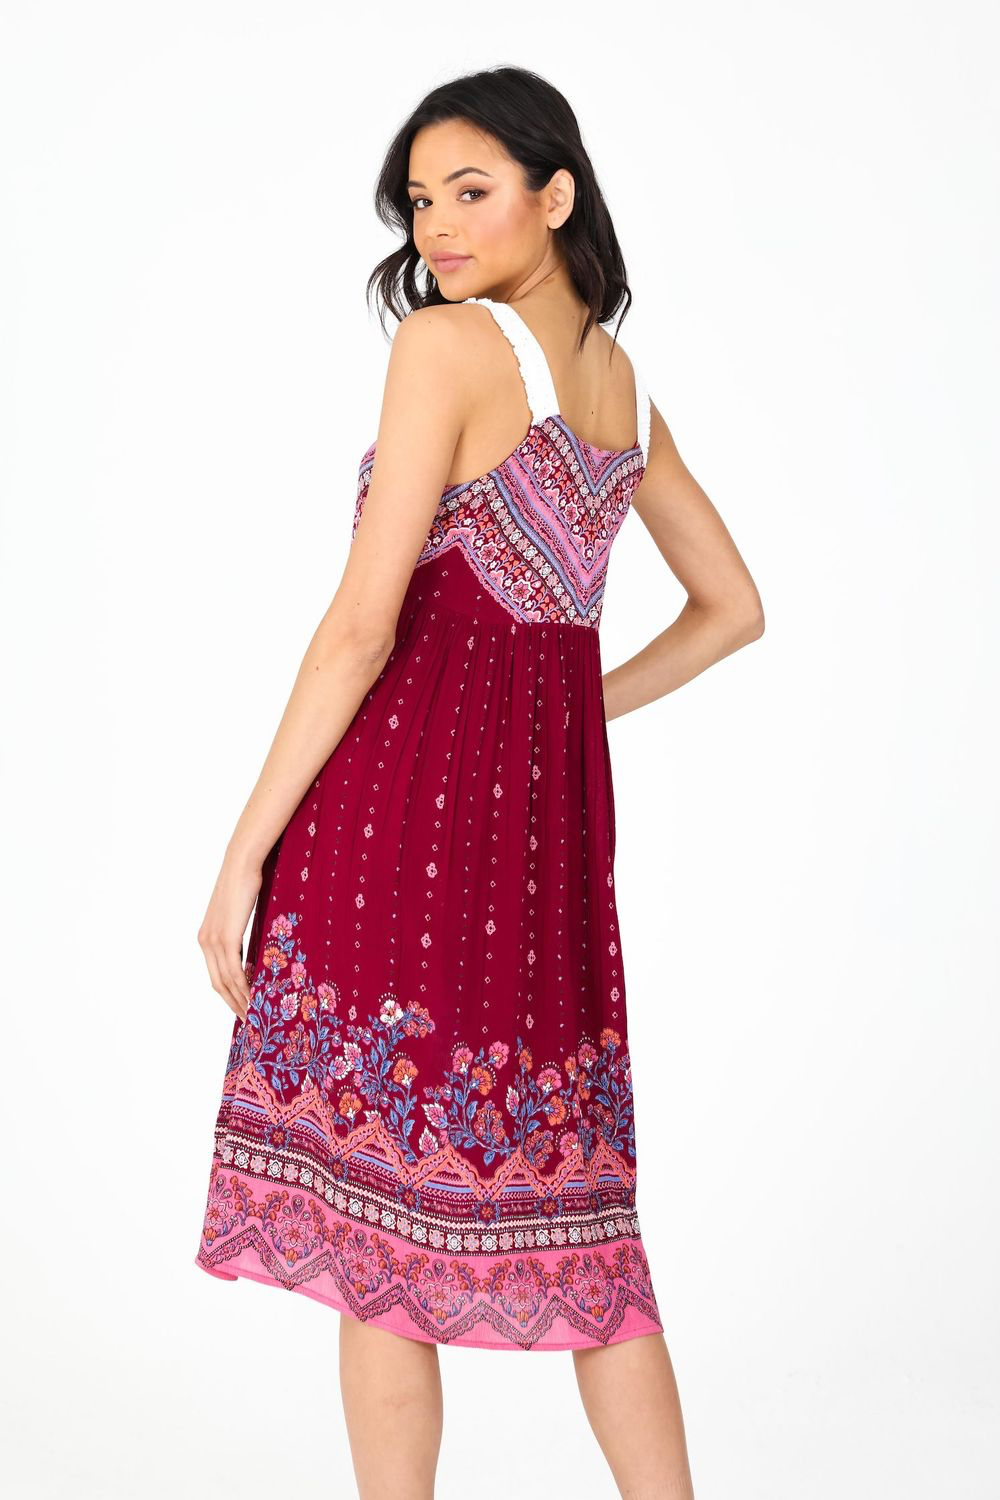 Mojave Dress - Kingfisher Road - Online Boutique